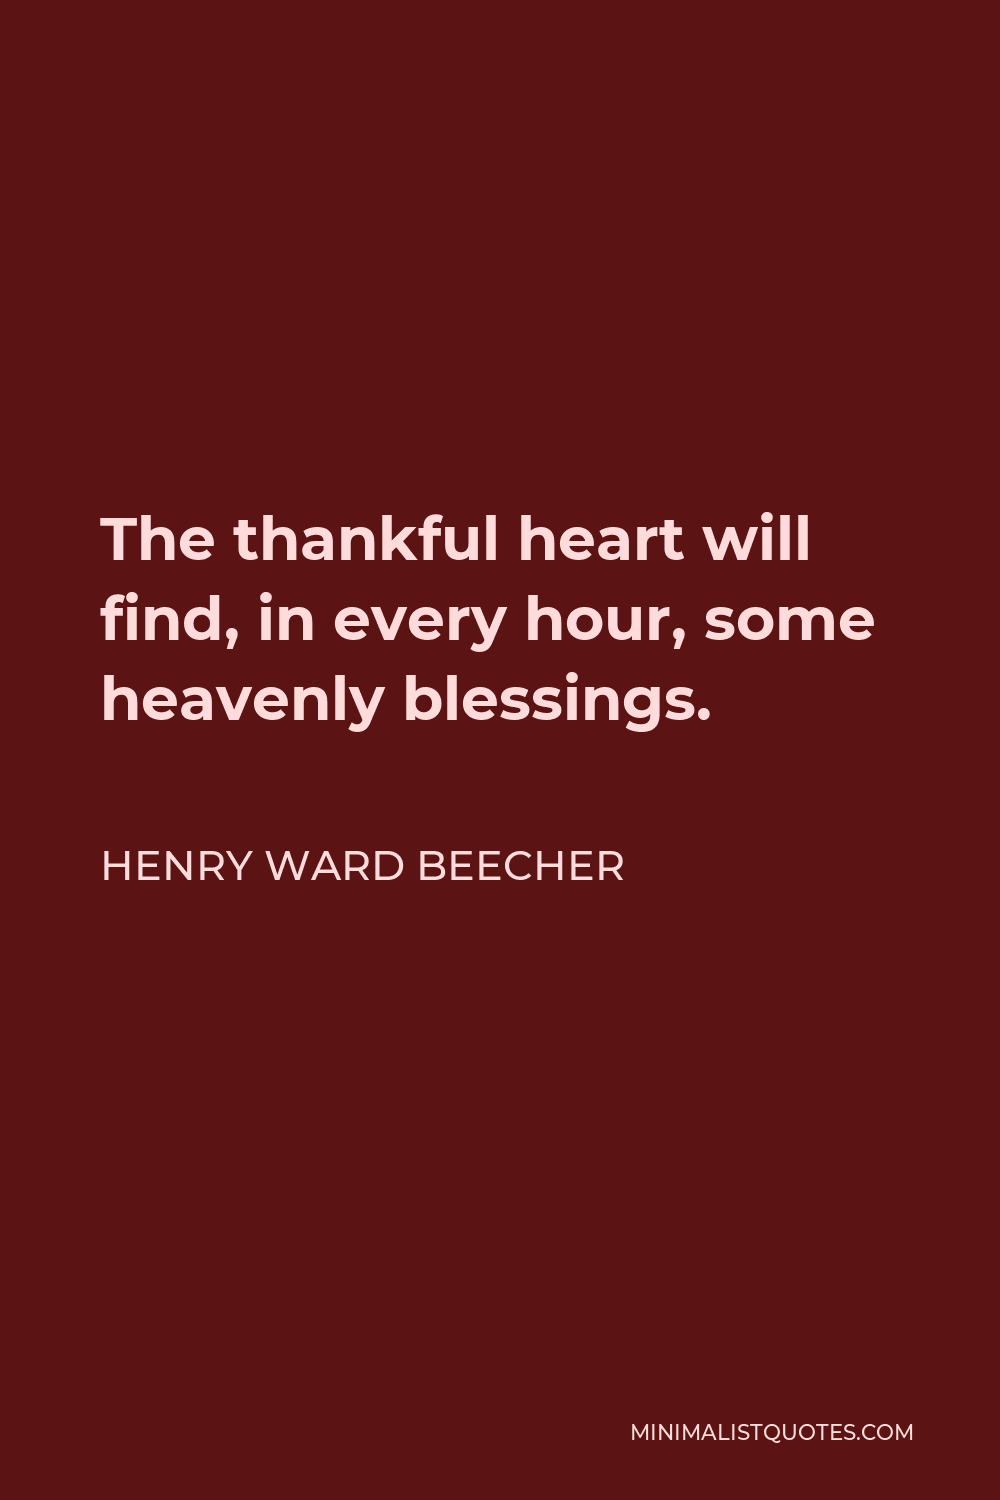 Henry Ward Beecher Quote - The thankful heart will find, in every hour, some heavenly blessings.